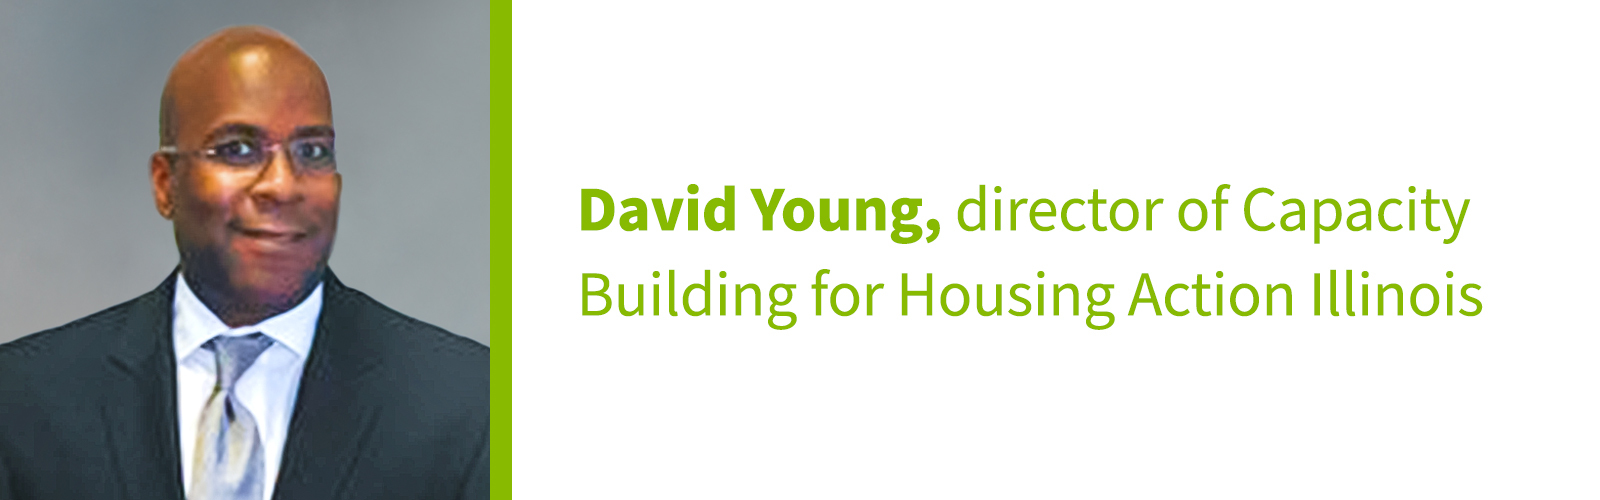 director of Capacity Building for Housing Action Illinois